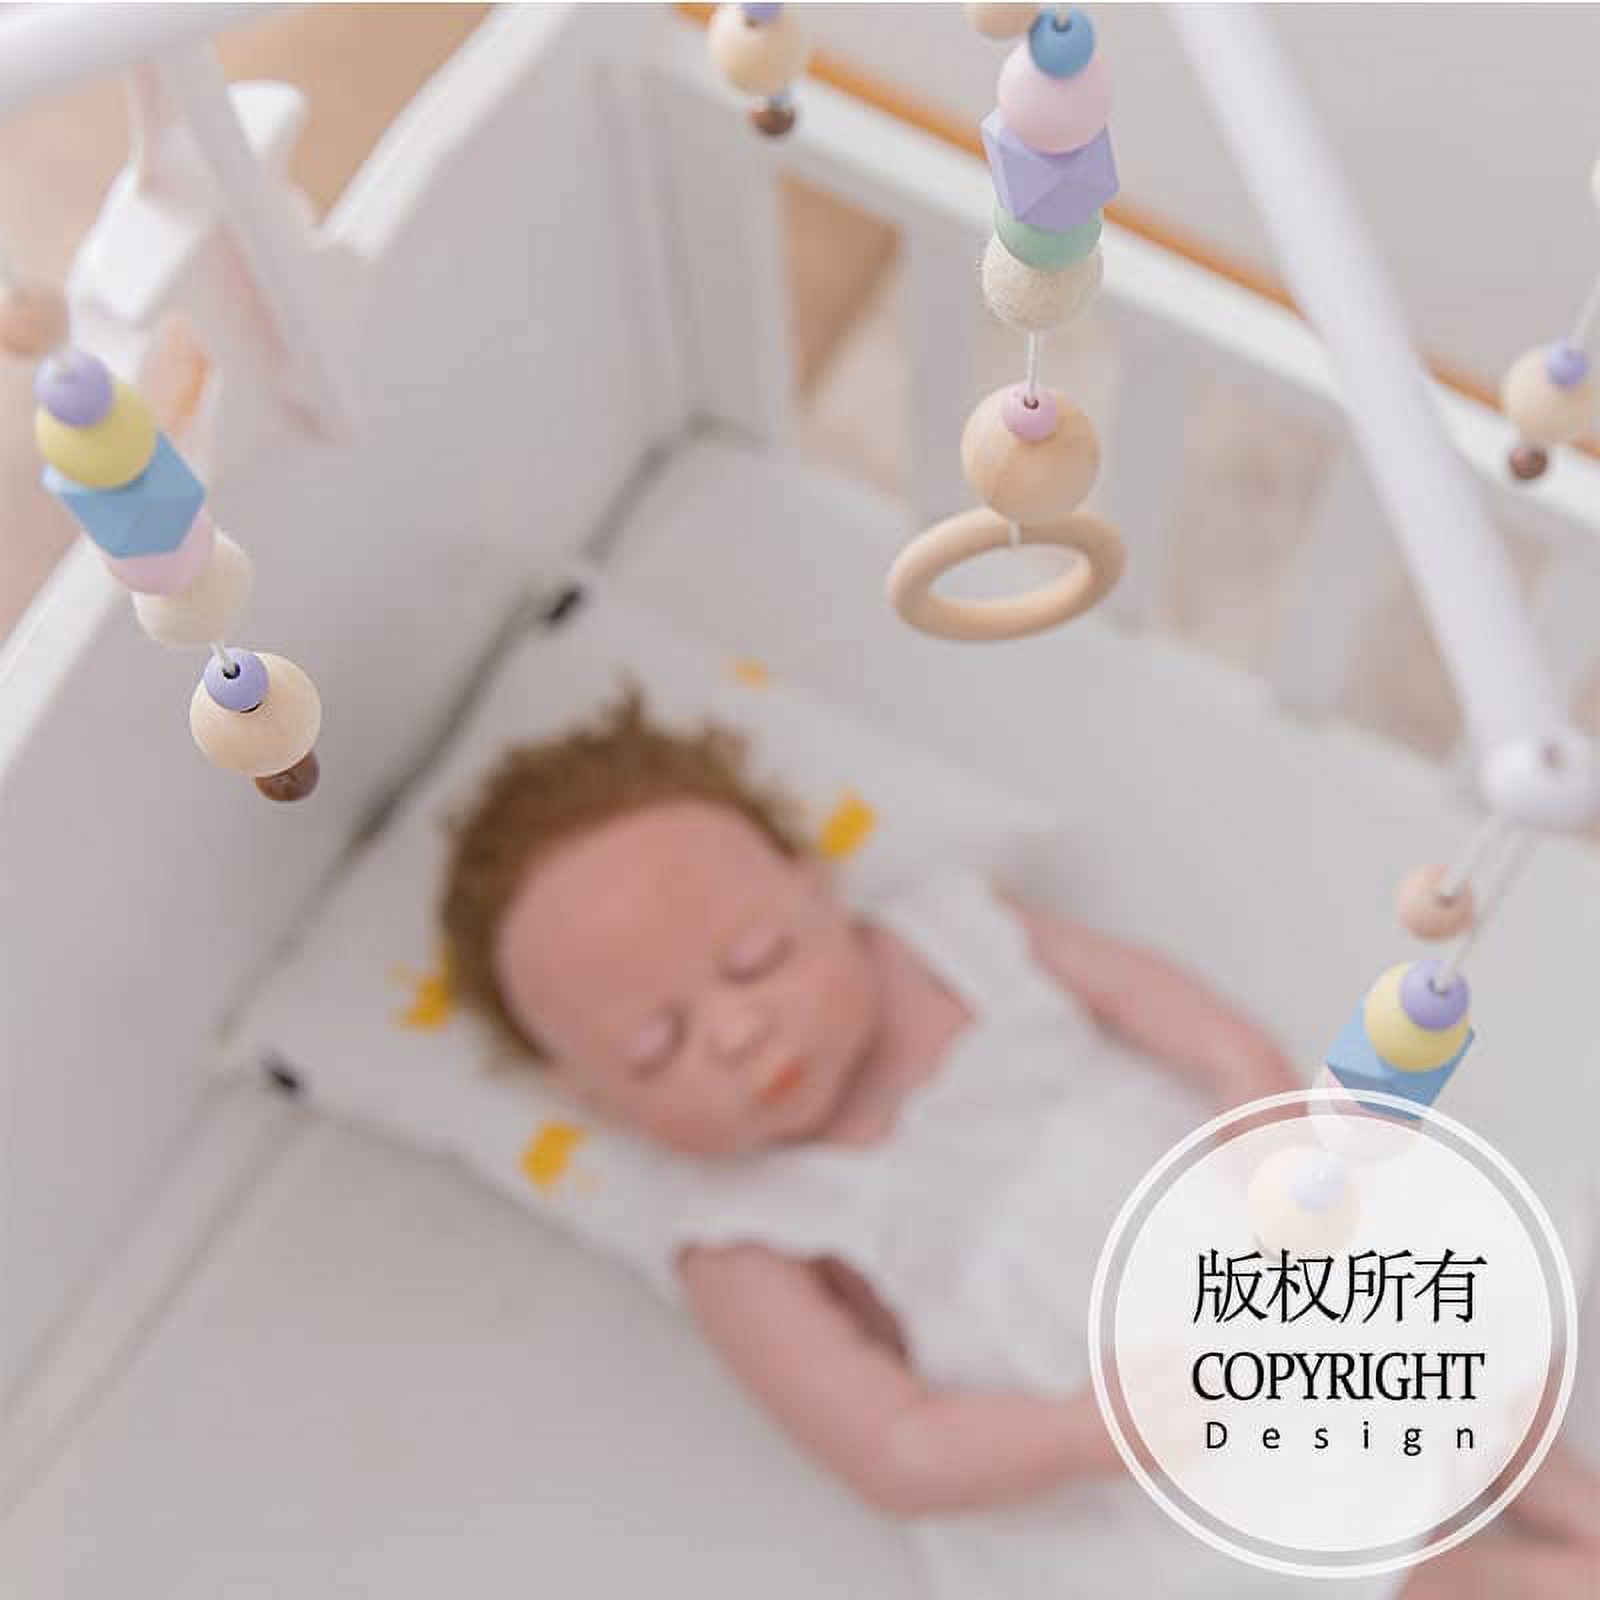 JETM·HH Baby Crib Mobile Arm Wooden Holder 30 inch Beech Hangers with  Rotating Music Box Nursery Decor Attachment Safe Anti Slip Set